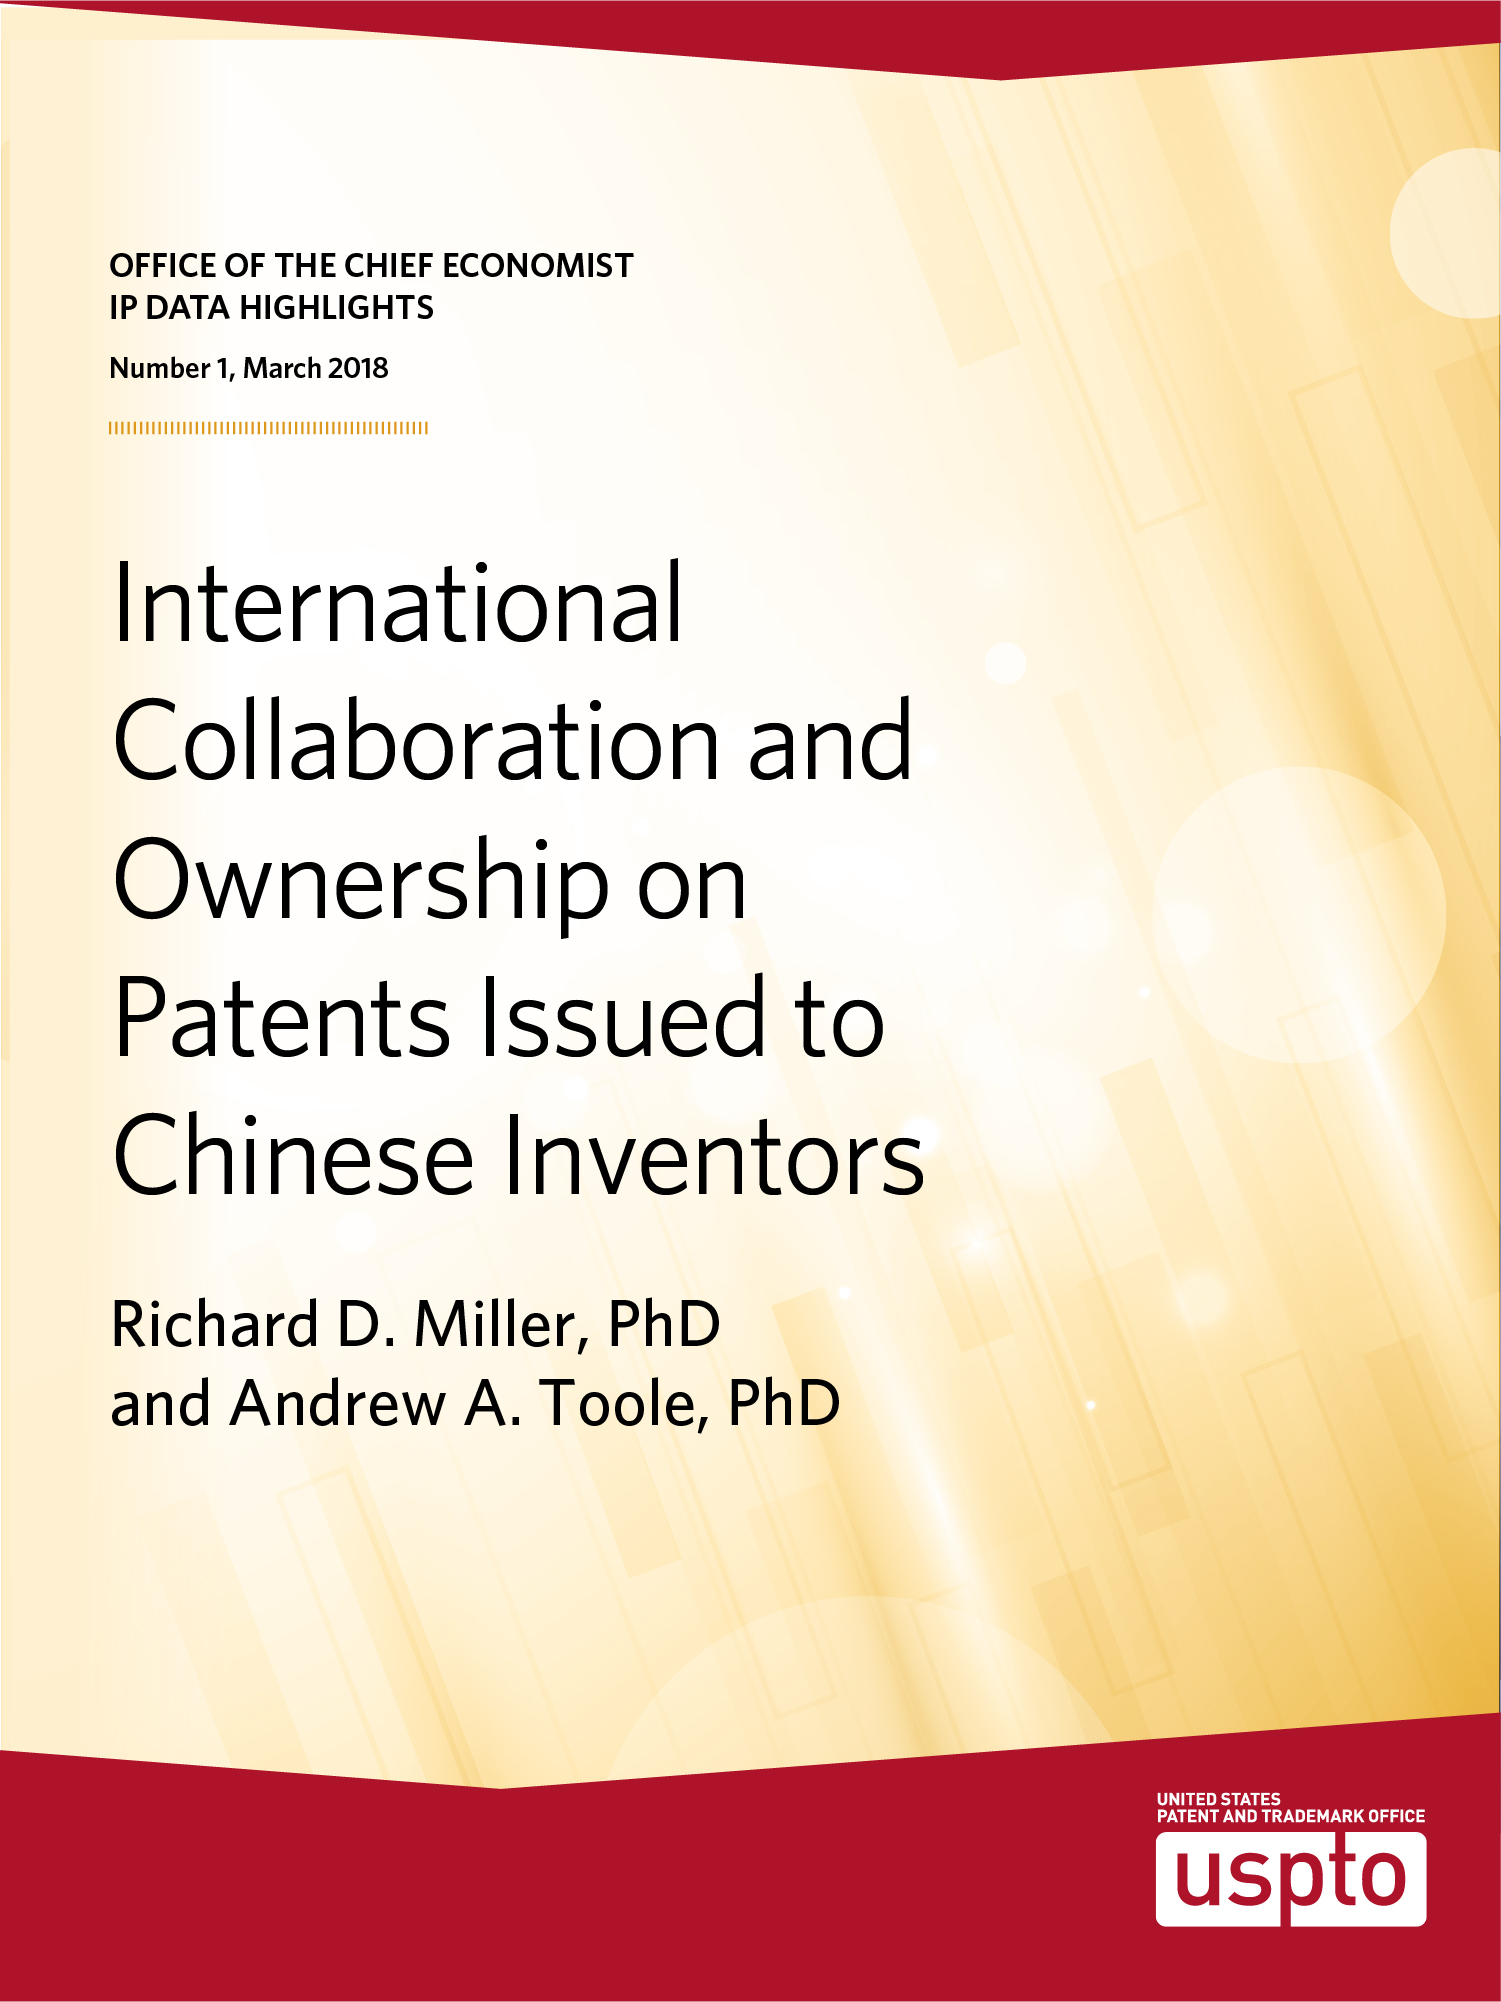 IP Data Highlight no. 1: International collaboration and ownership on patents issued to Chinese inventors, text on a yellow background